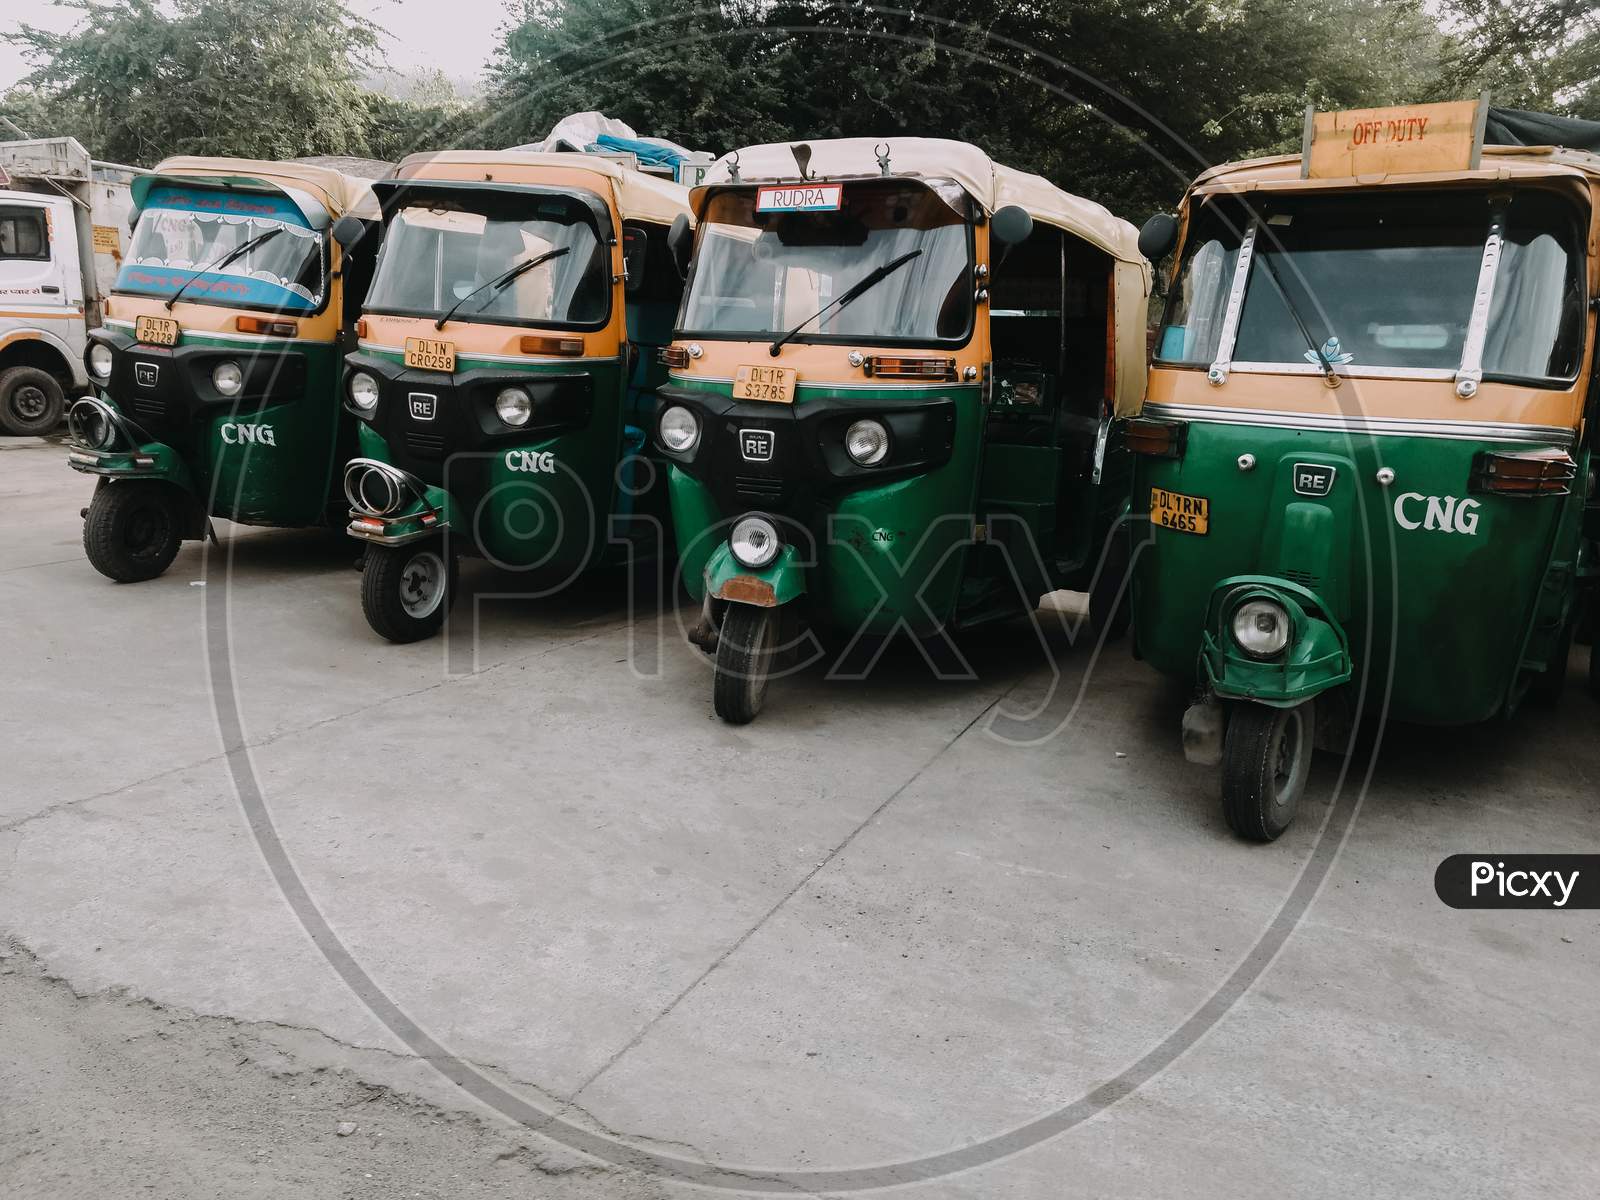 Delhi, India, 15 June 2020 - Group Of Indian Auto Rikshaw On The Street (Tuk-Tuk) Used By Tourists And Local As Means Of Transportation